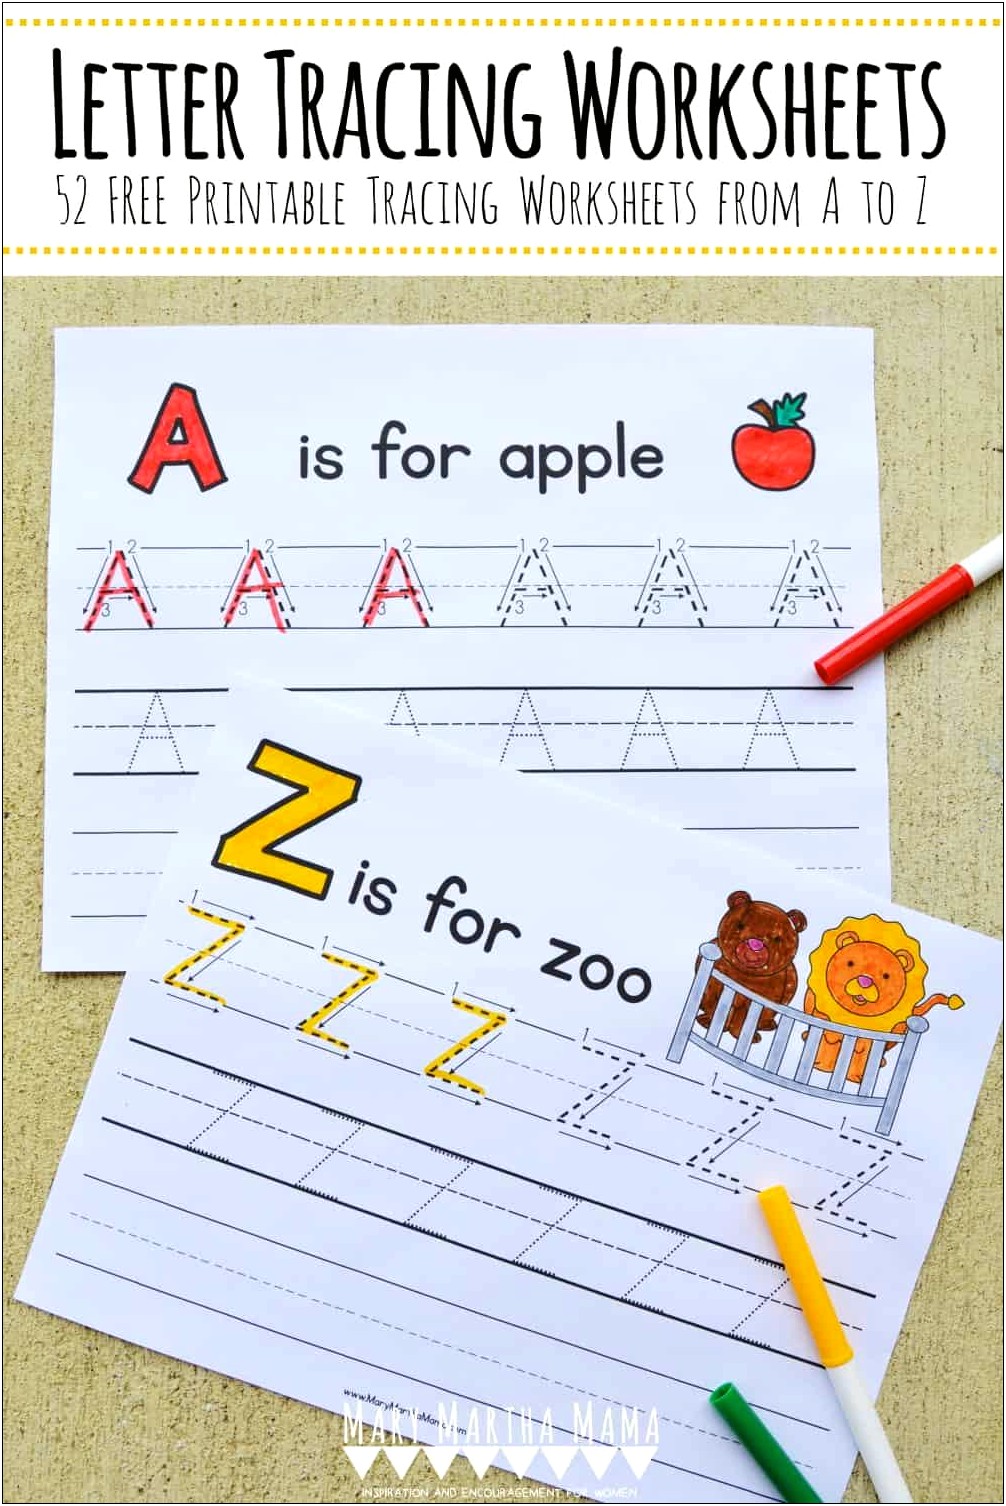 Free Book Quizzing Printables Or Templates For Kindergarten